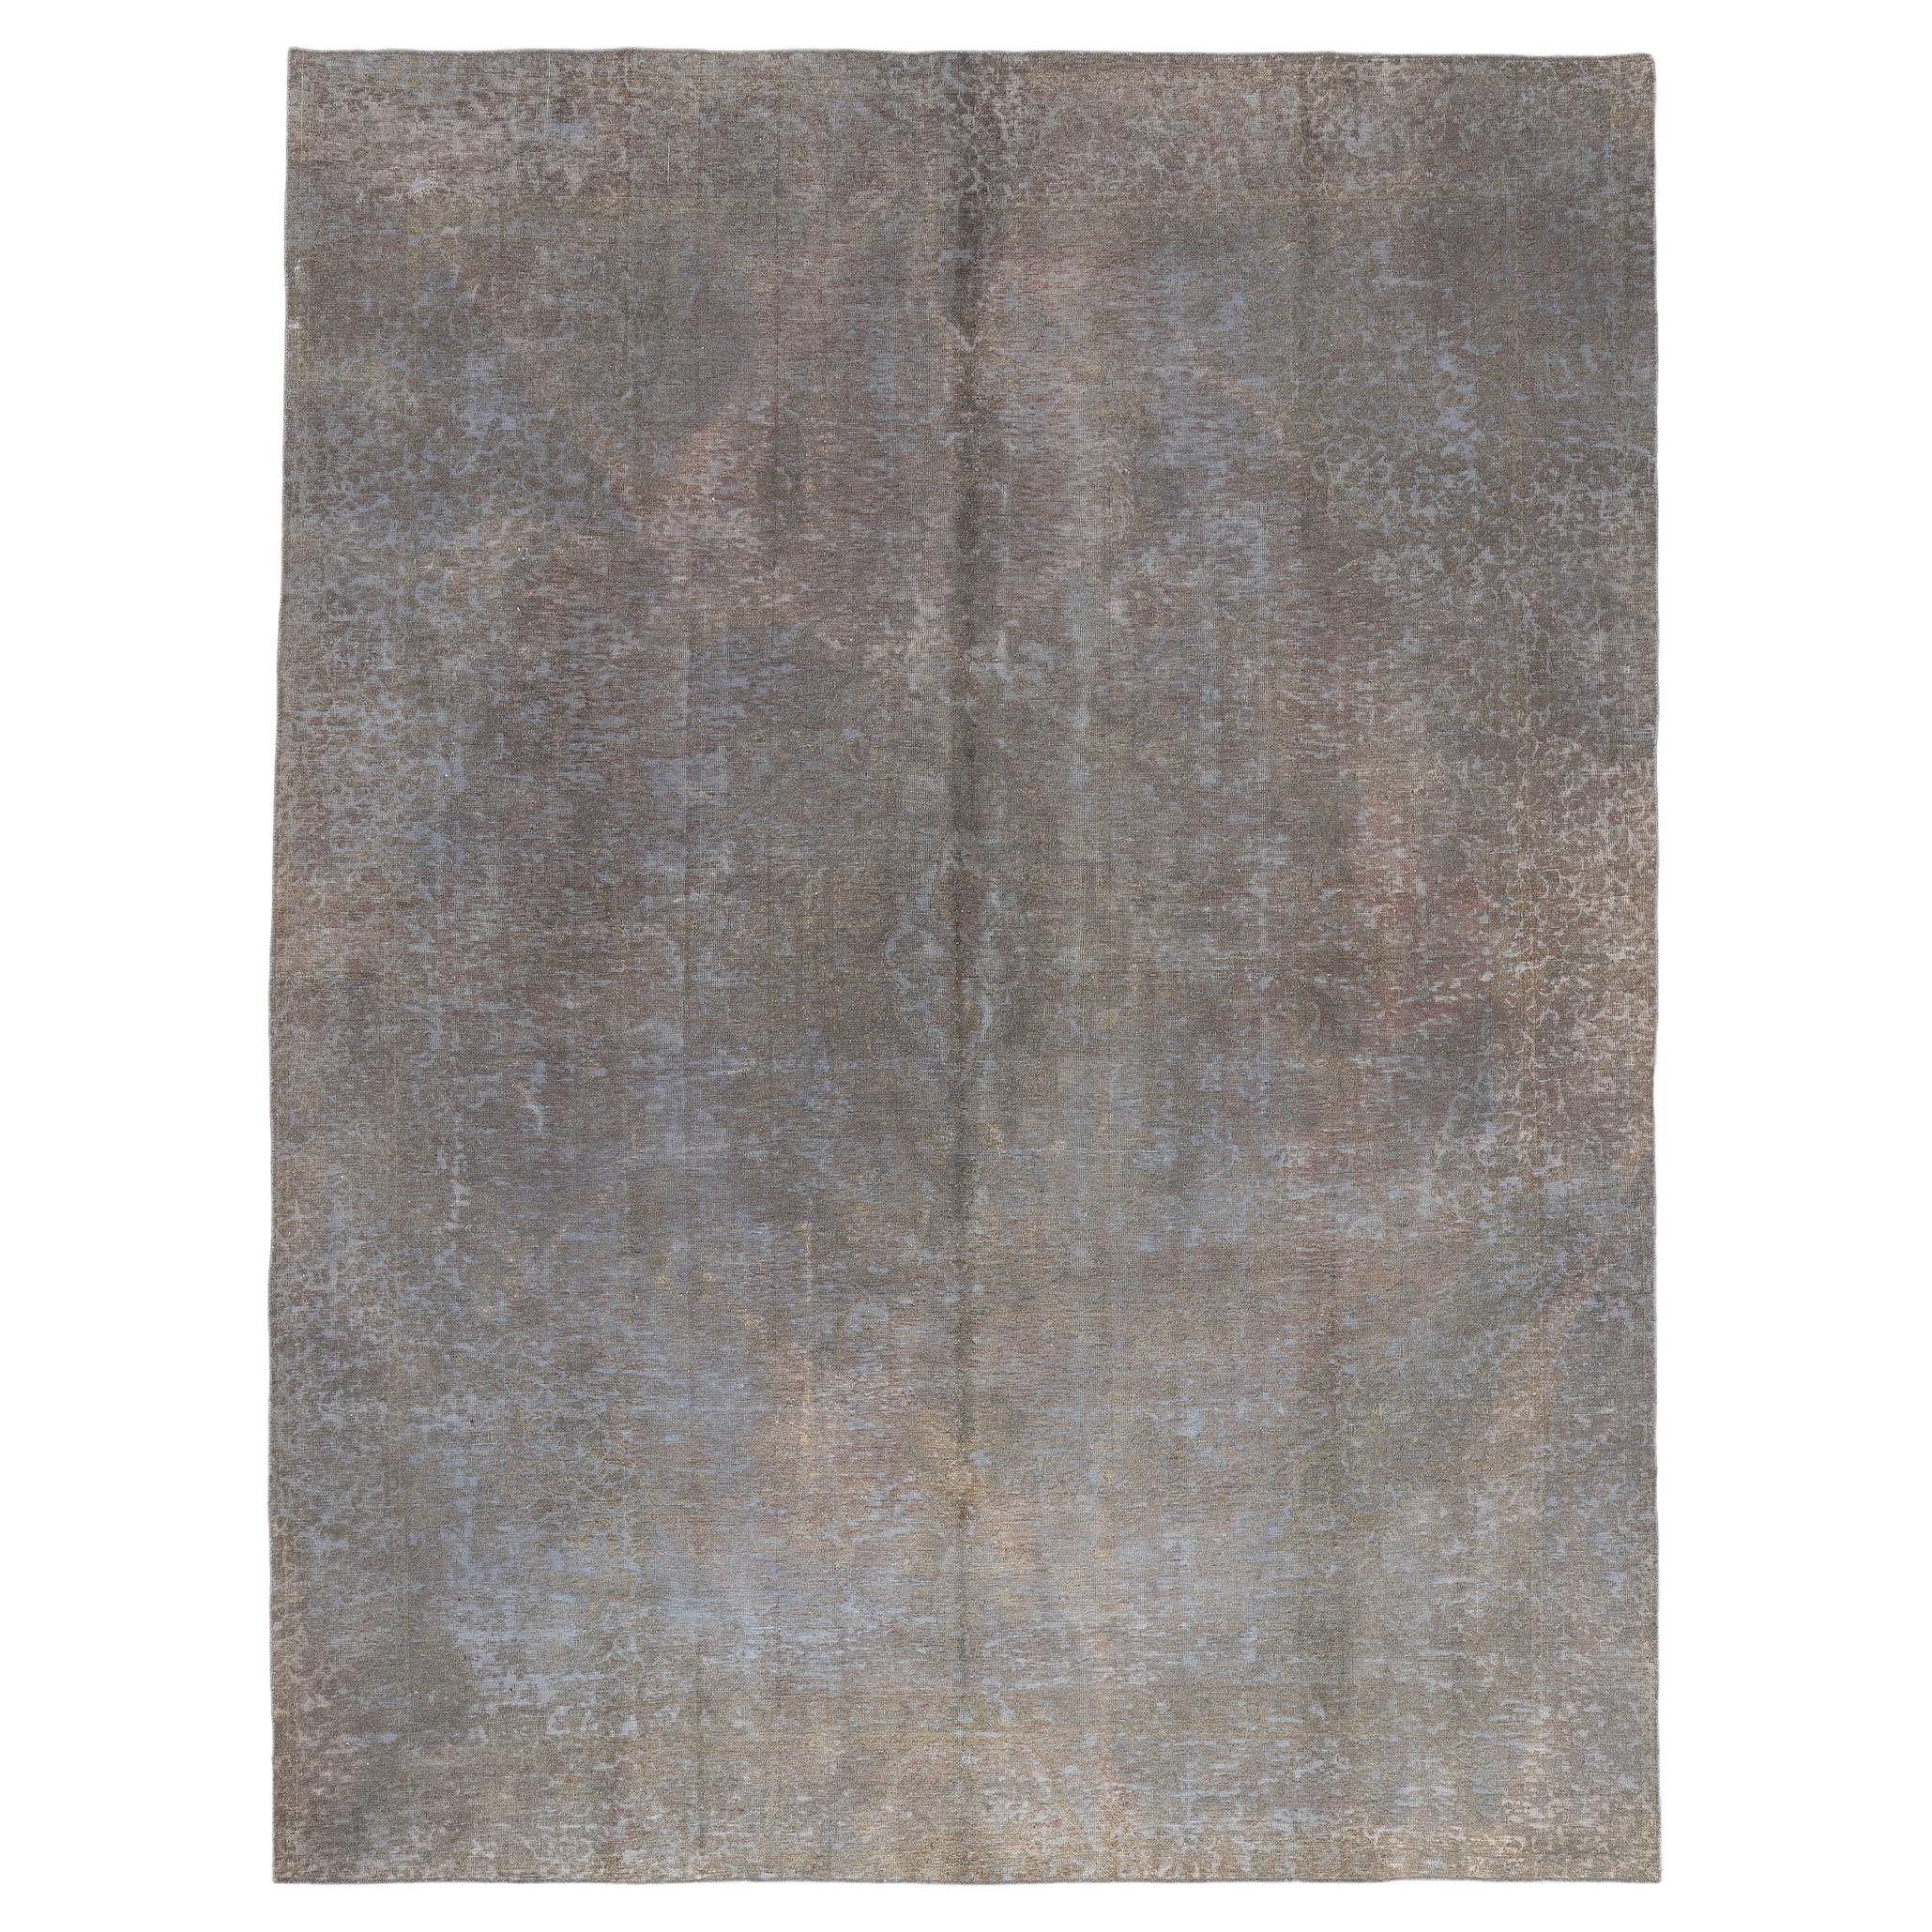 Vintage Turkish Overdyed Rug, Luxe Utilitarian Appeal Meets Modern Industrial For Sale